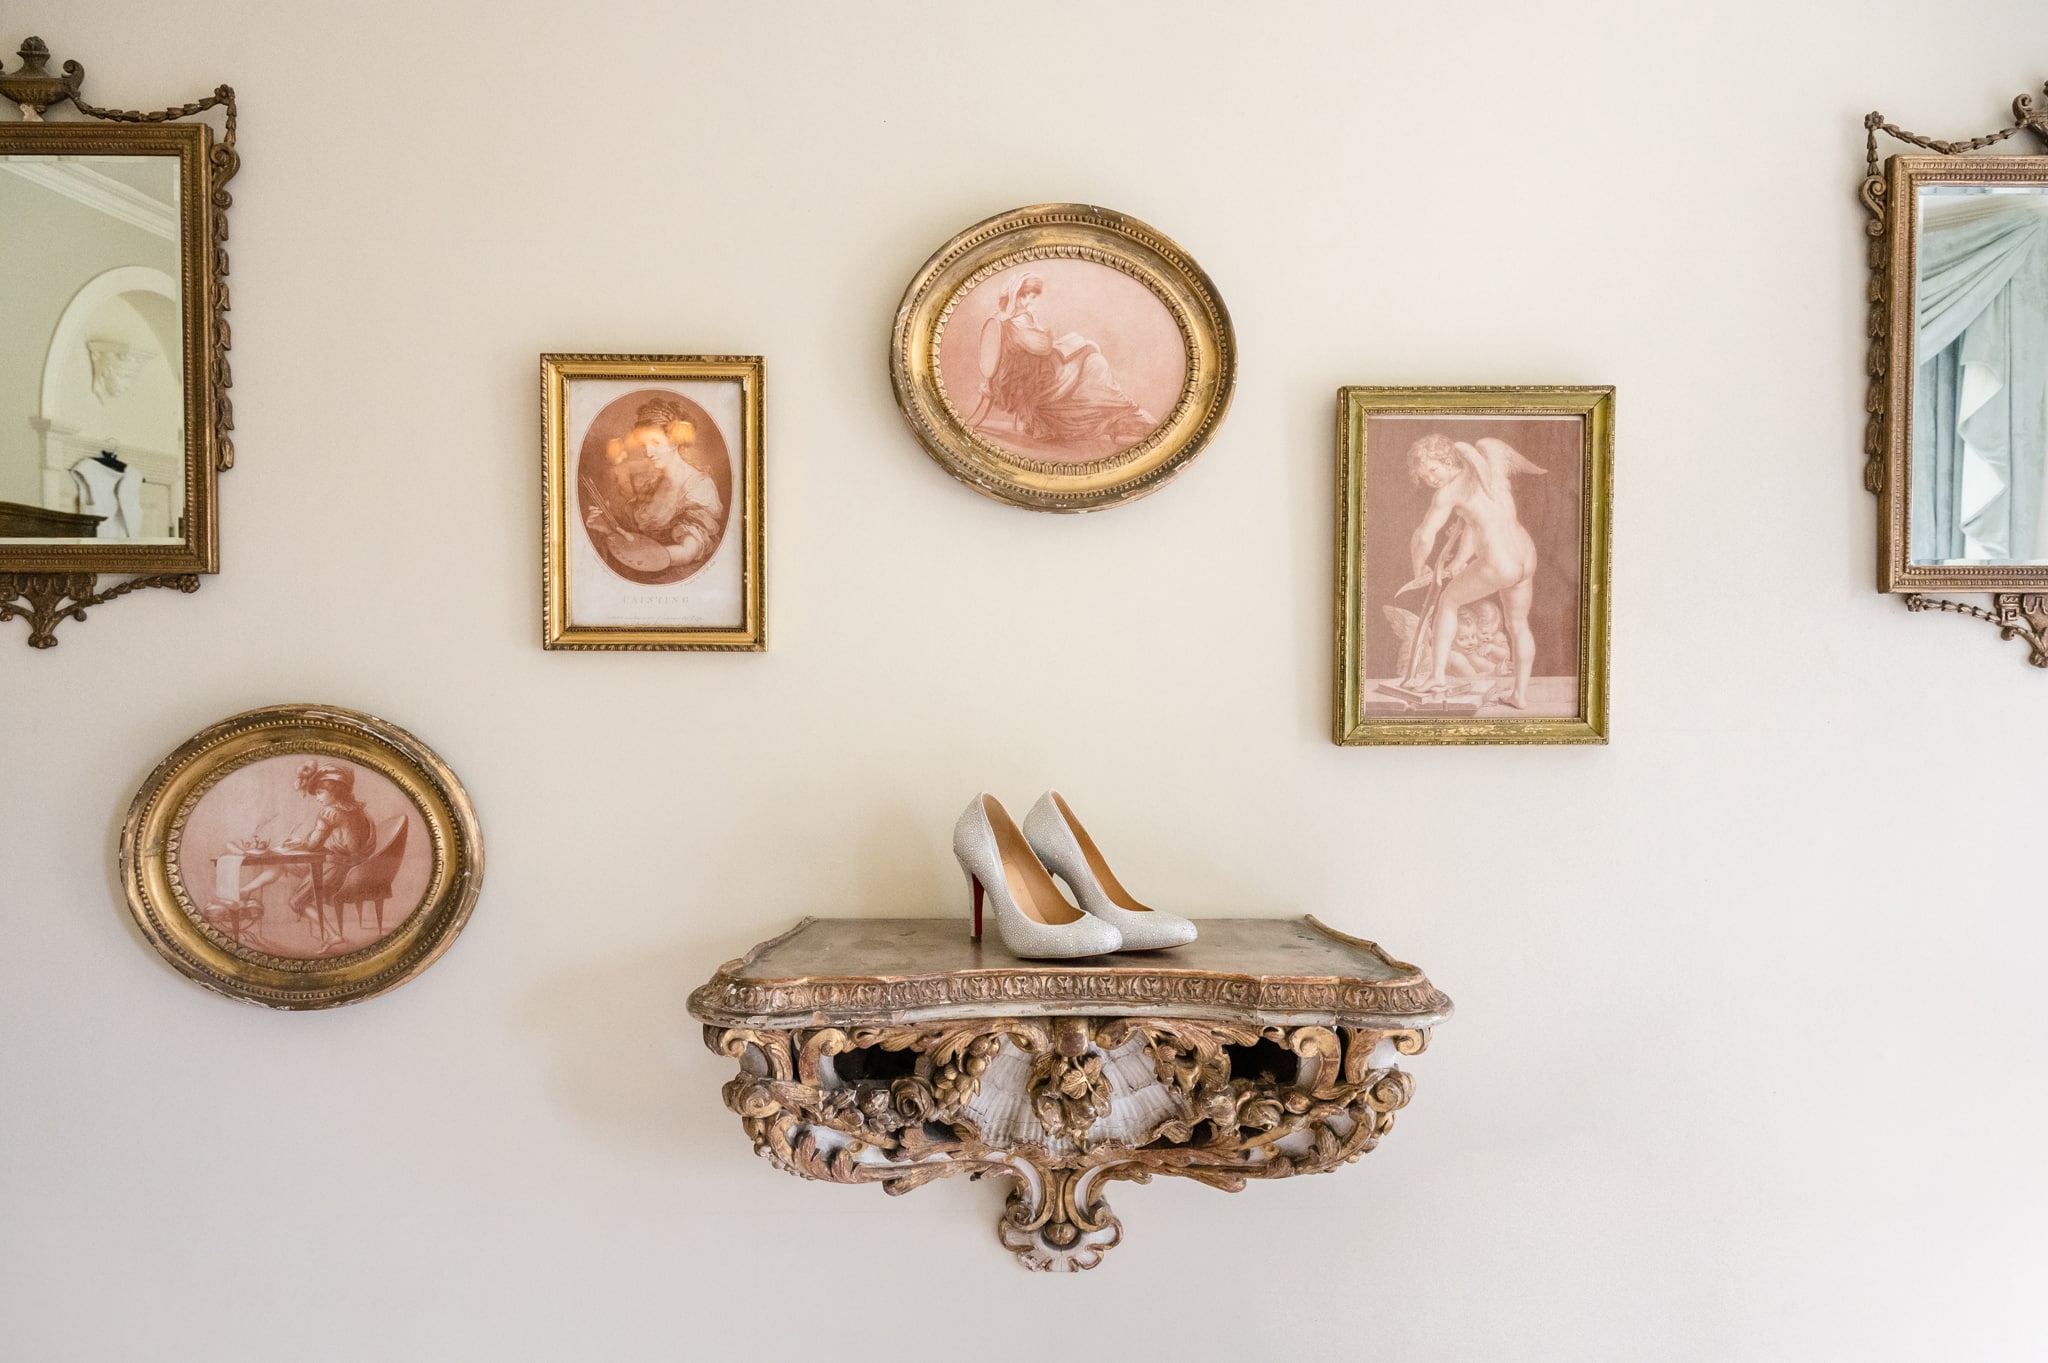 The bride's shoes on an ornate gilt shelf in the bridal suite at Sutton Bonington Hall